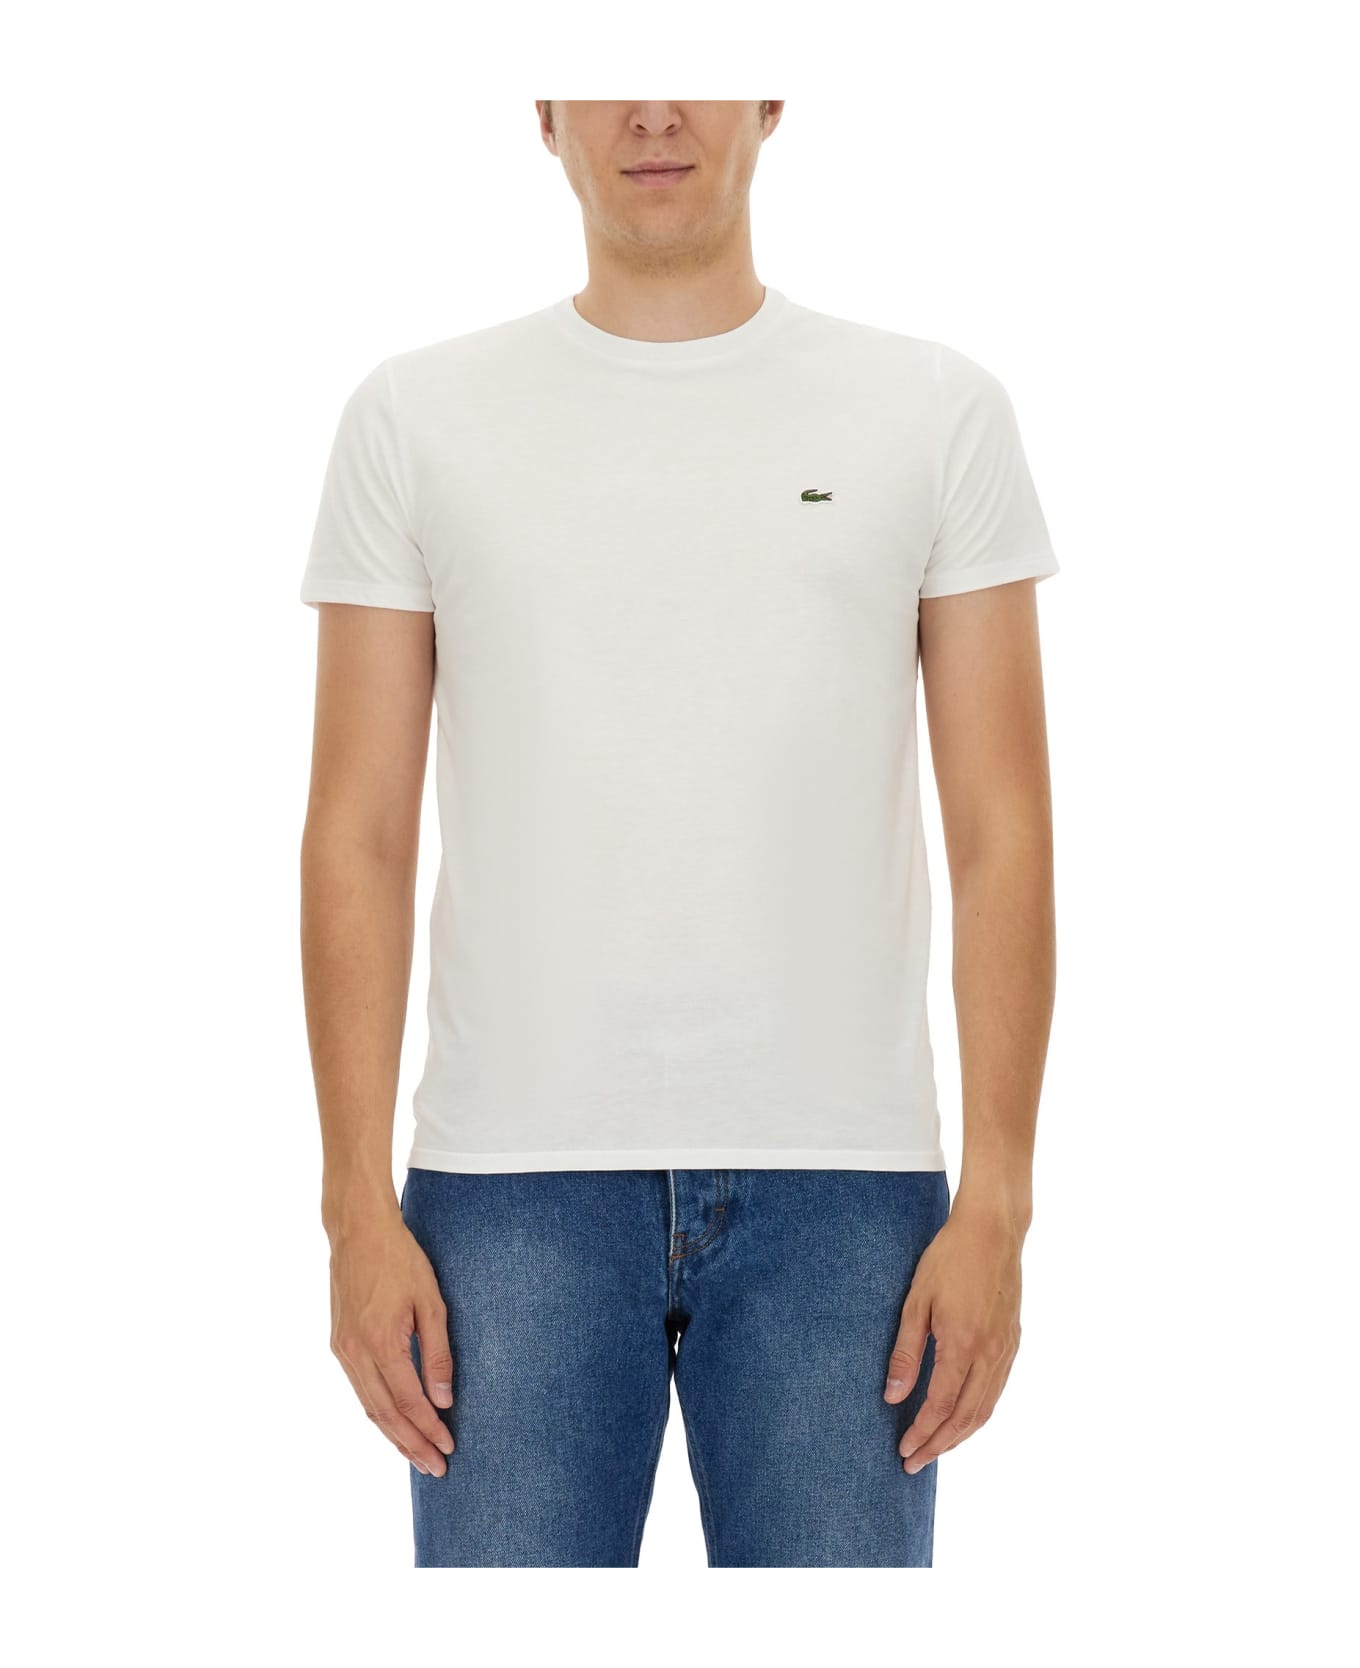 Lacoste T-shirt With Logo - White シャツ